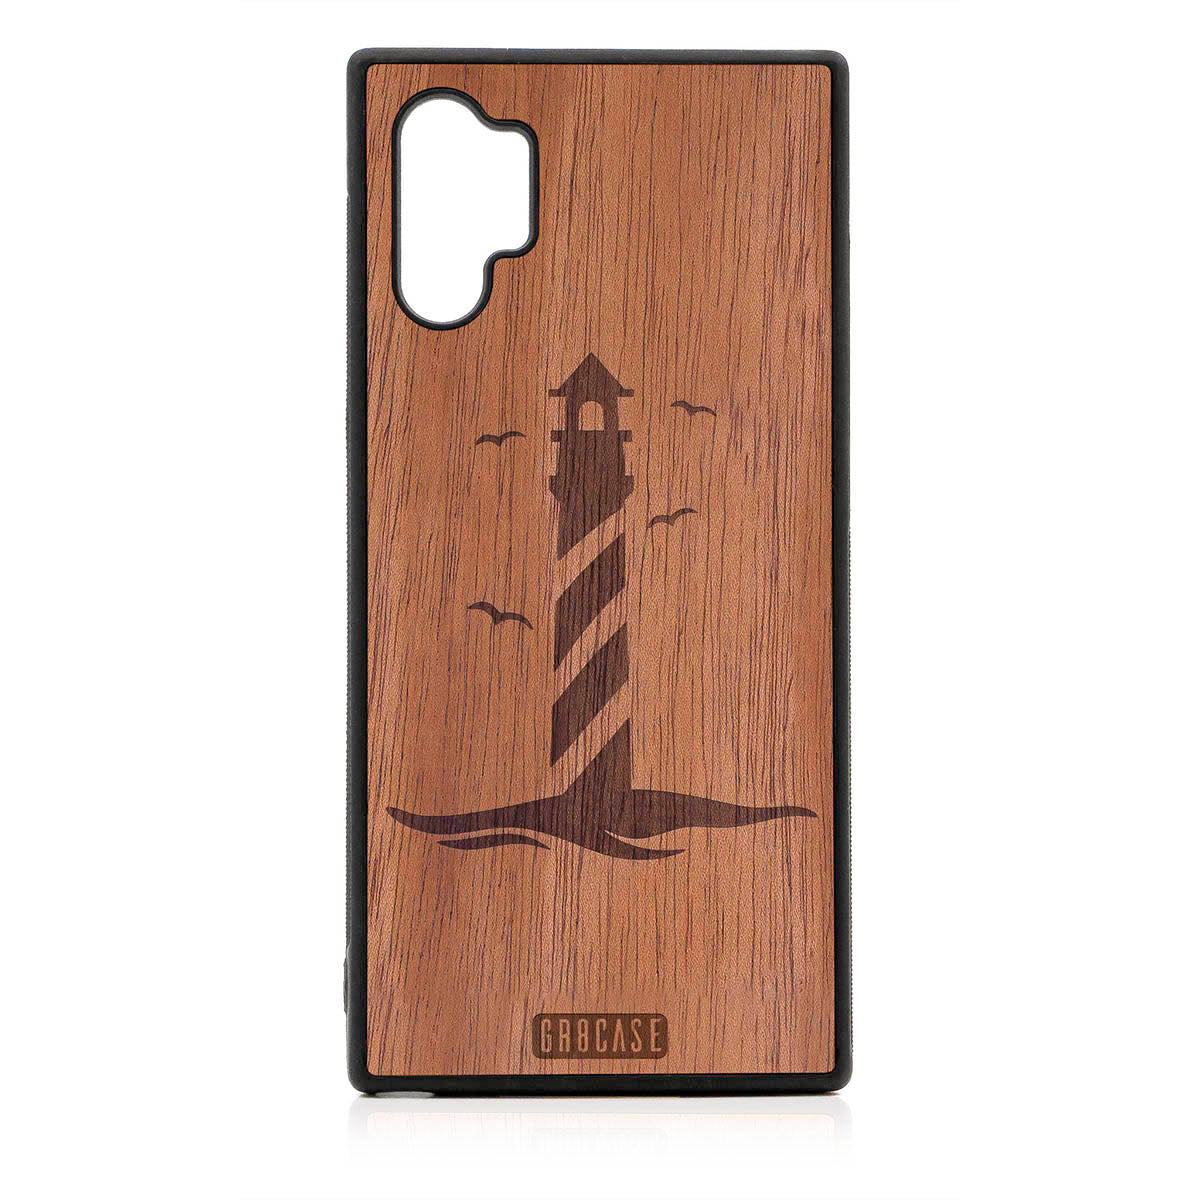 Lighthouse Design Wood Case For Samsung Galaxy Note 10 Plus